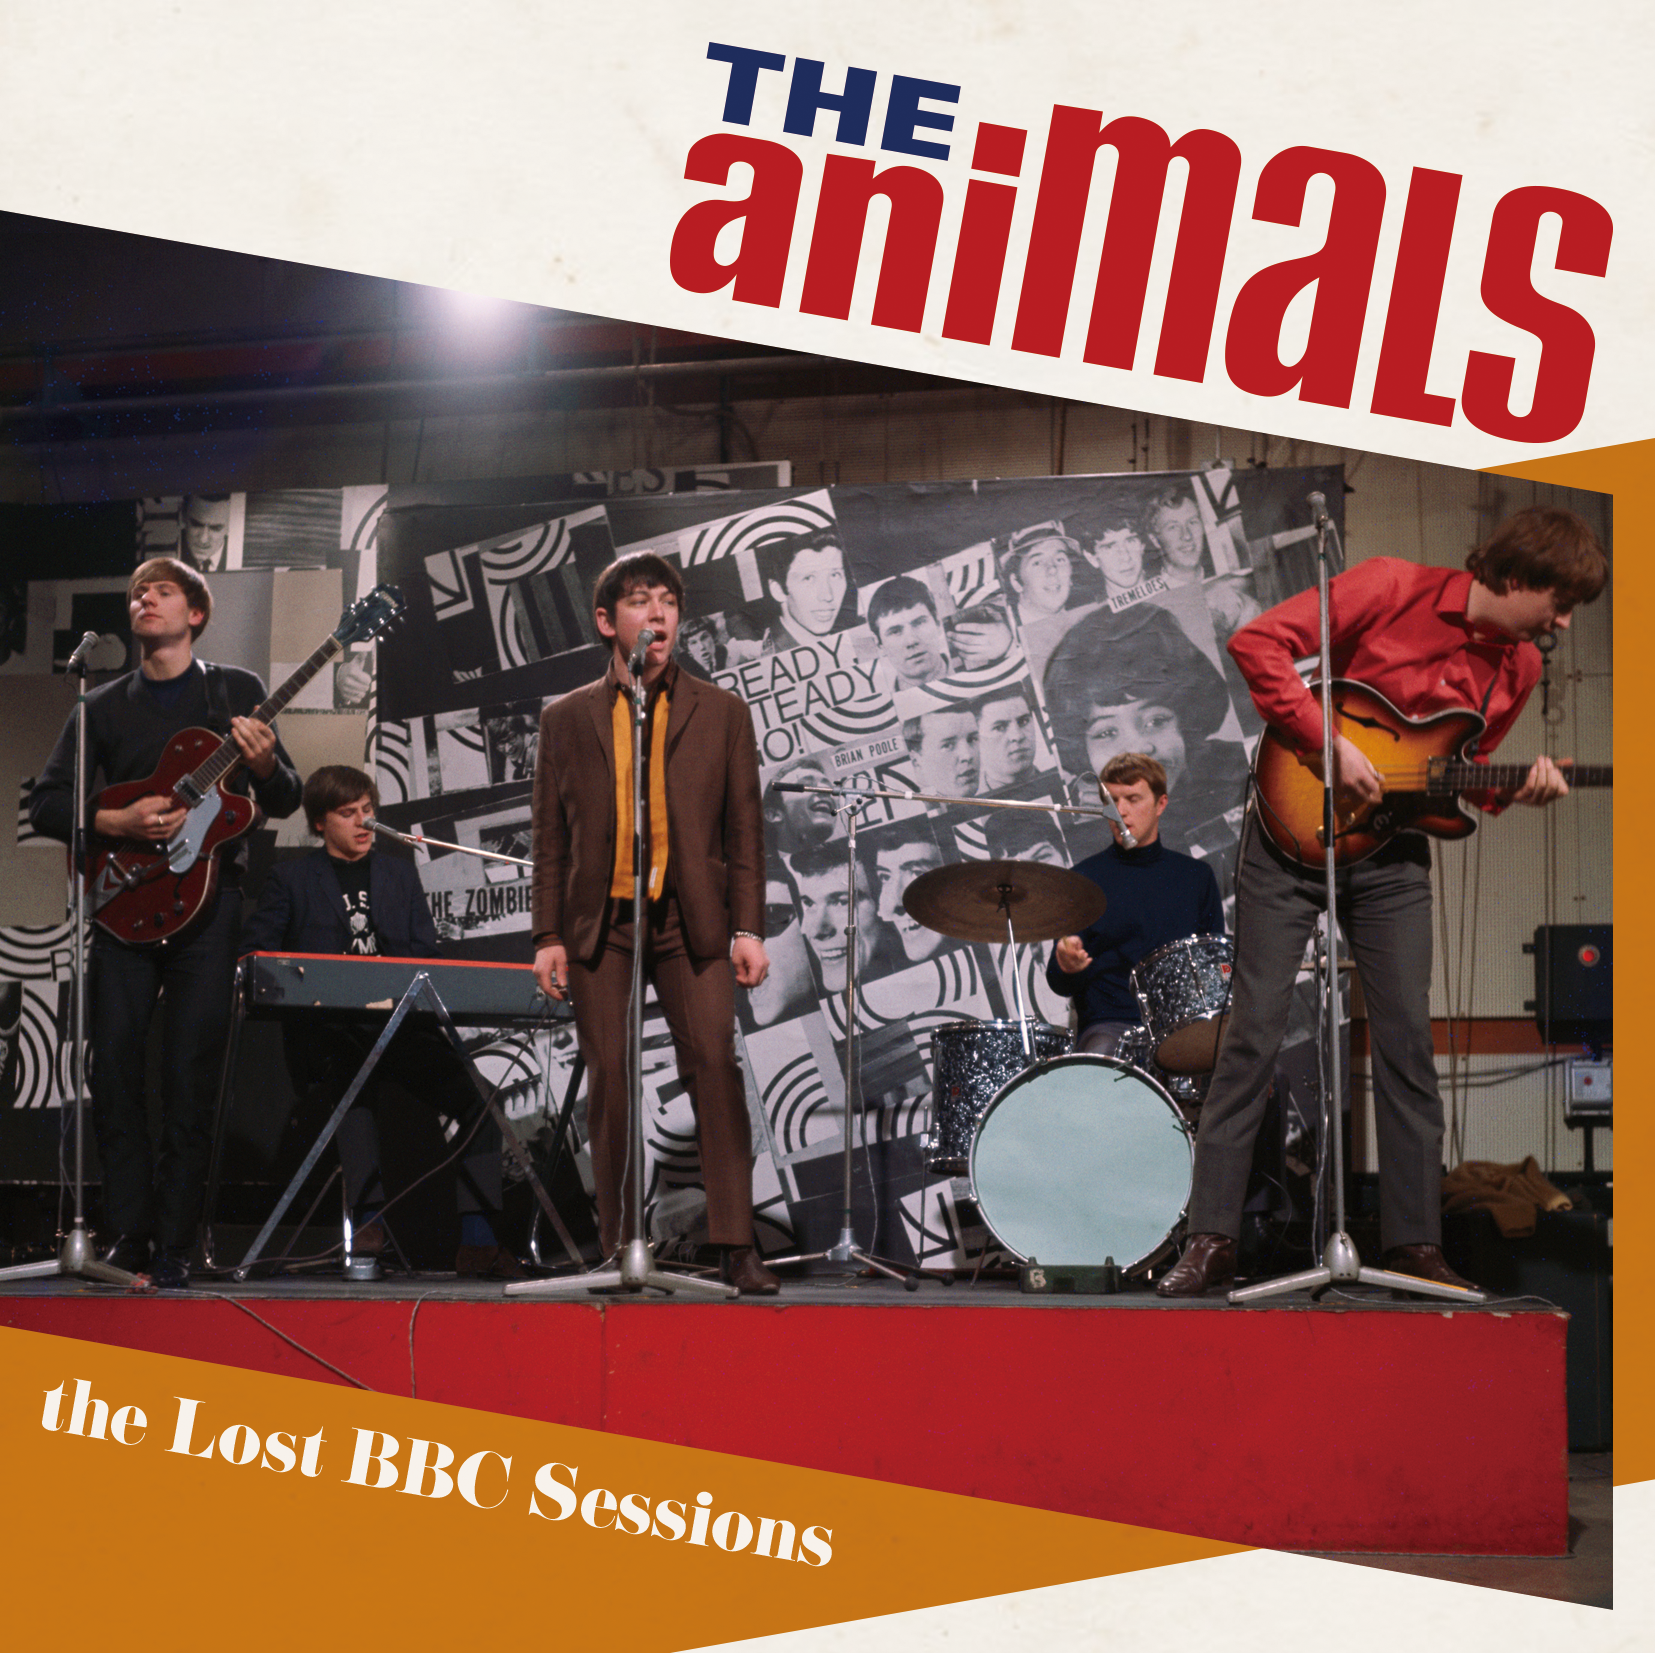 THE animals / the Lost BBC Sessions